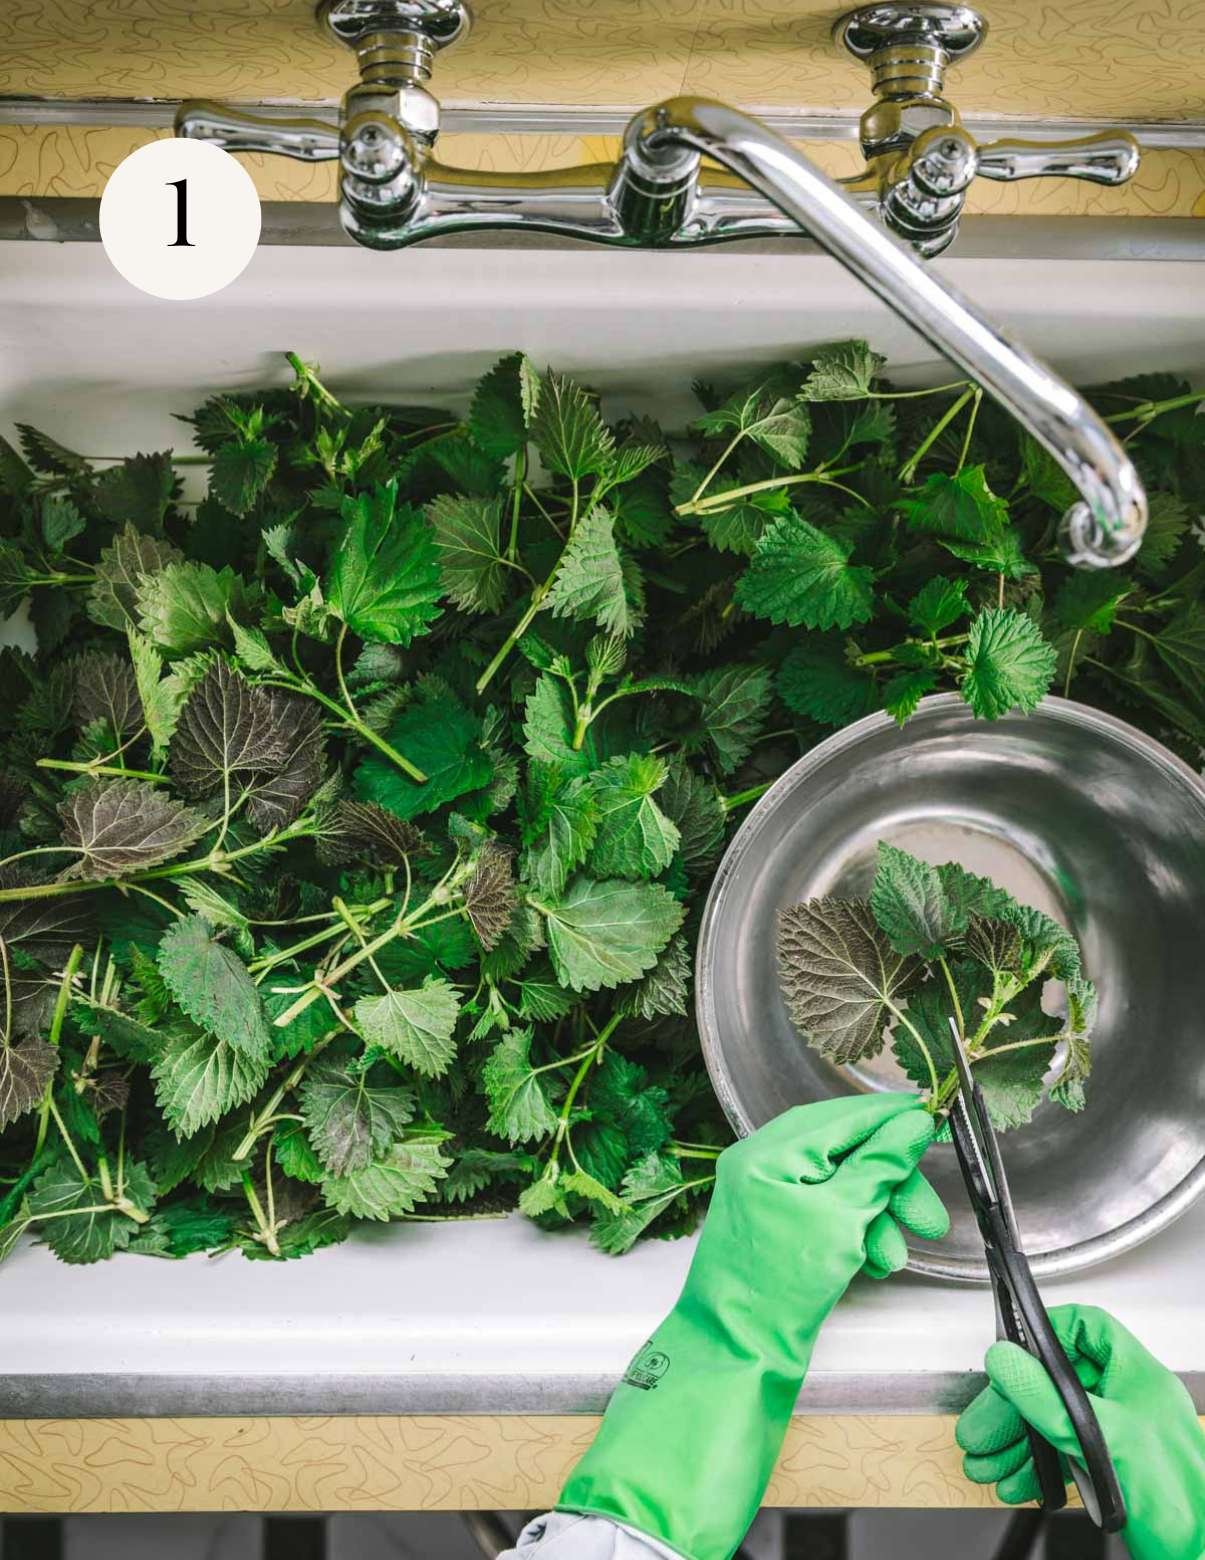 stinging nettles in a sink.